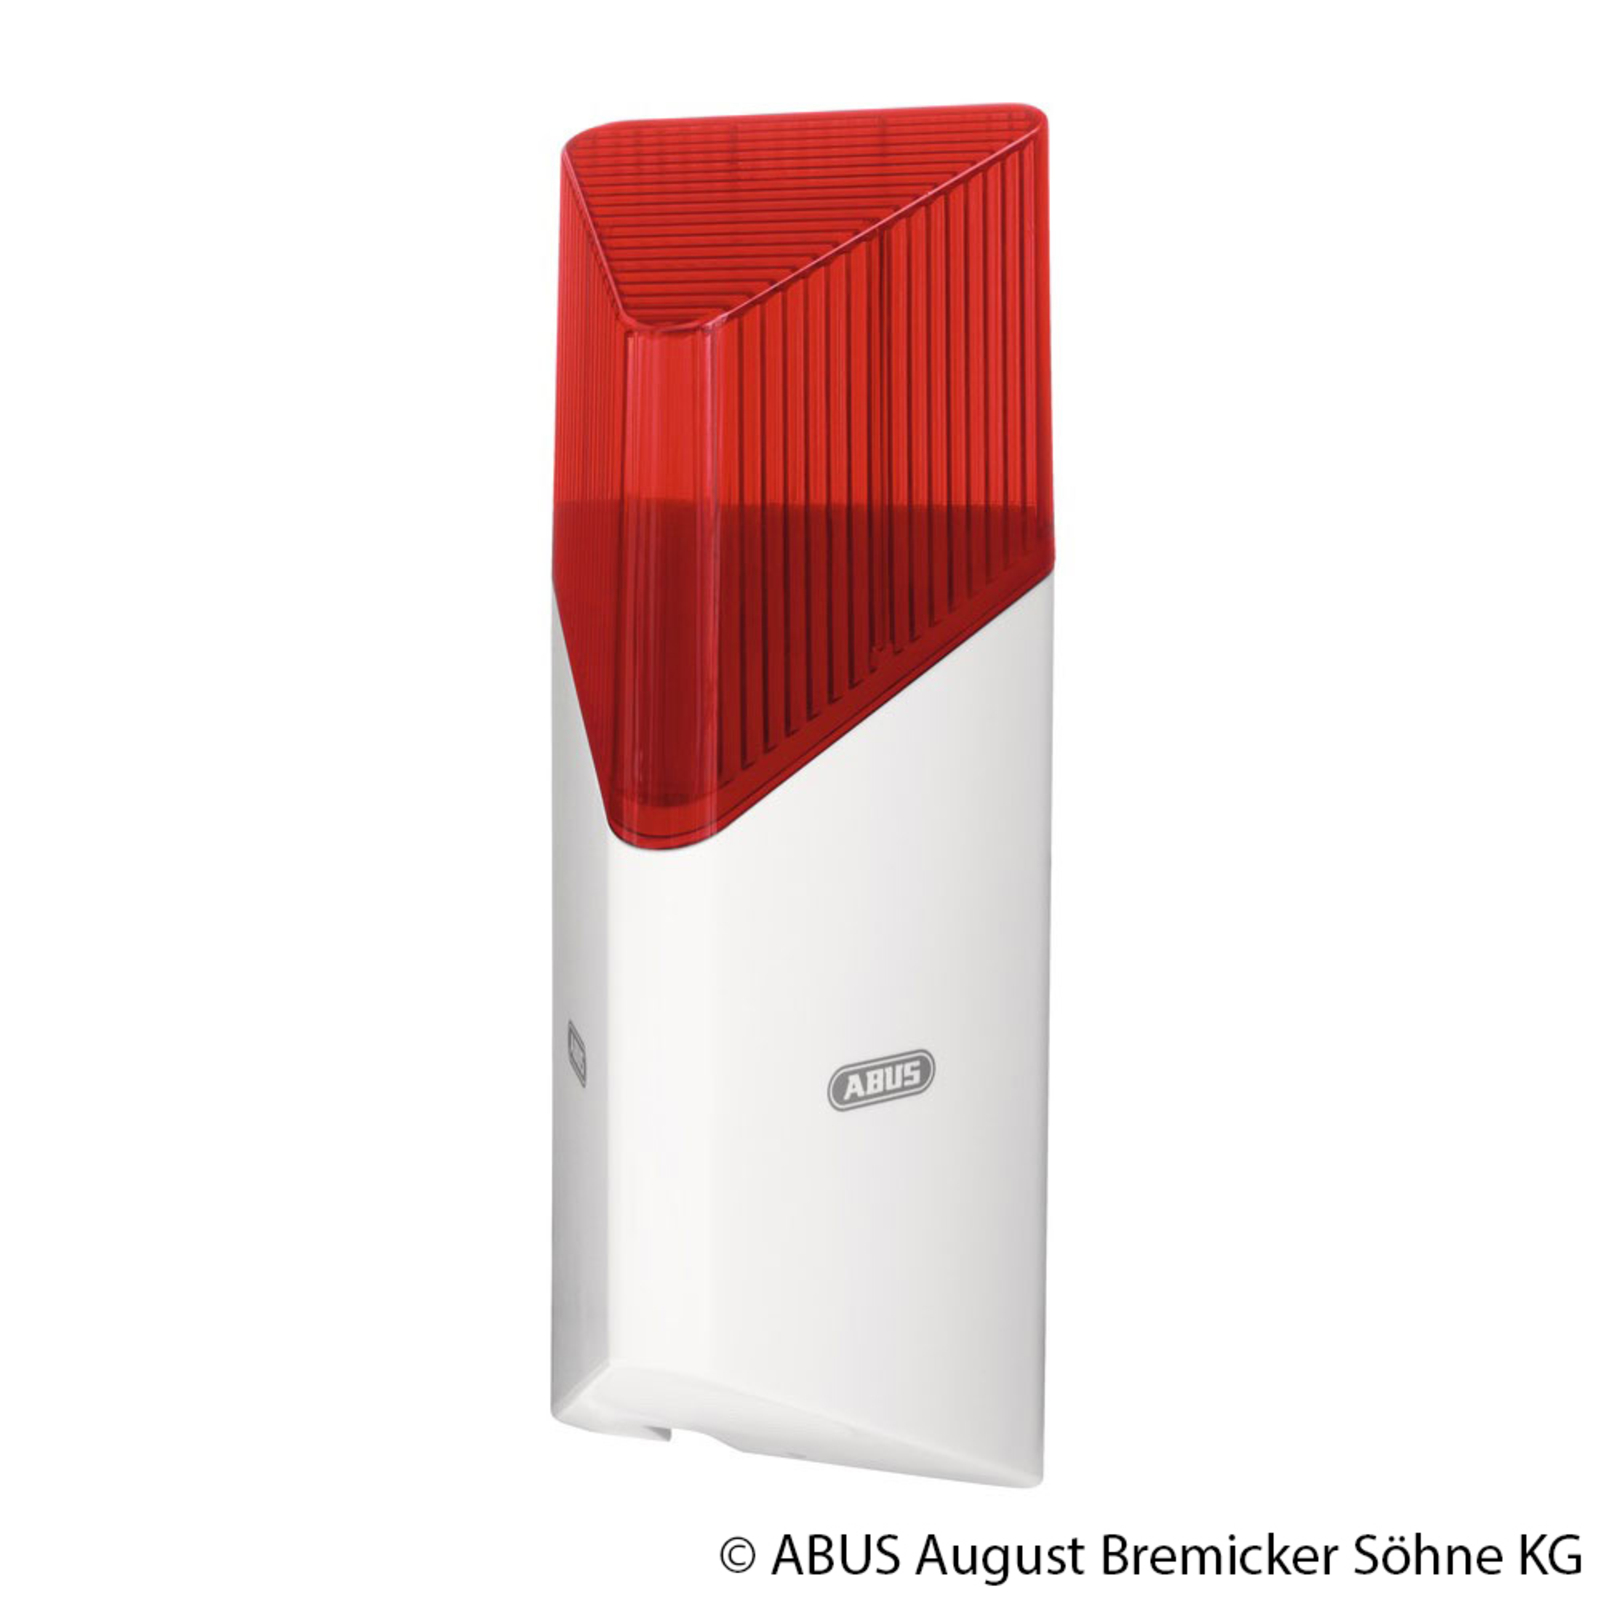 ABUS Smartvest wireless siren indoors and outdoors